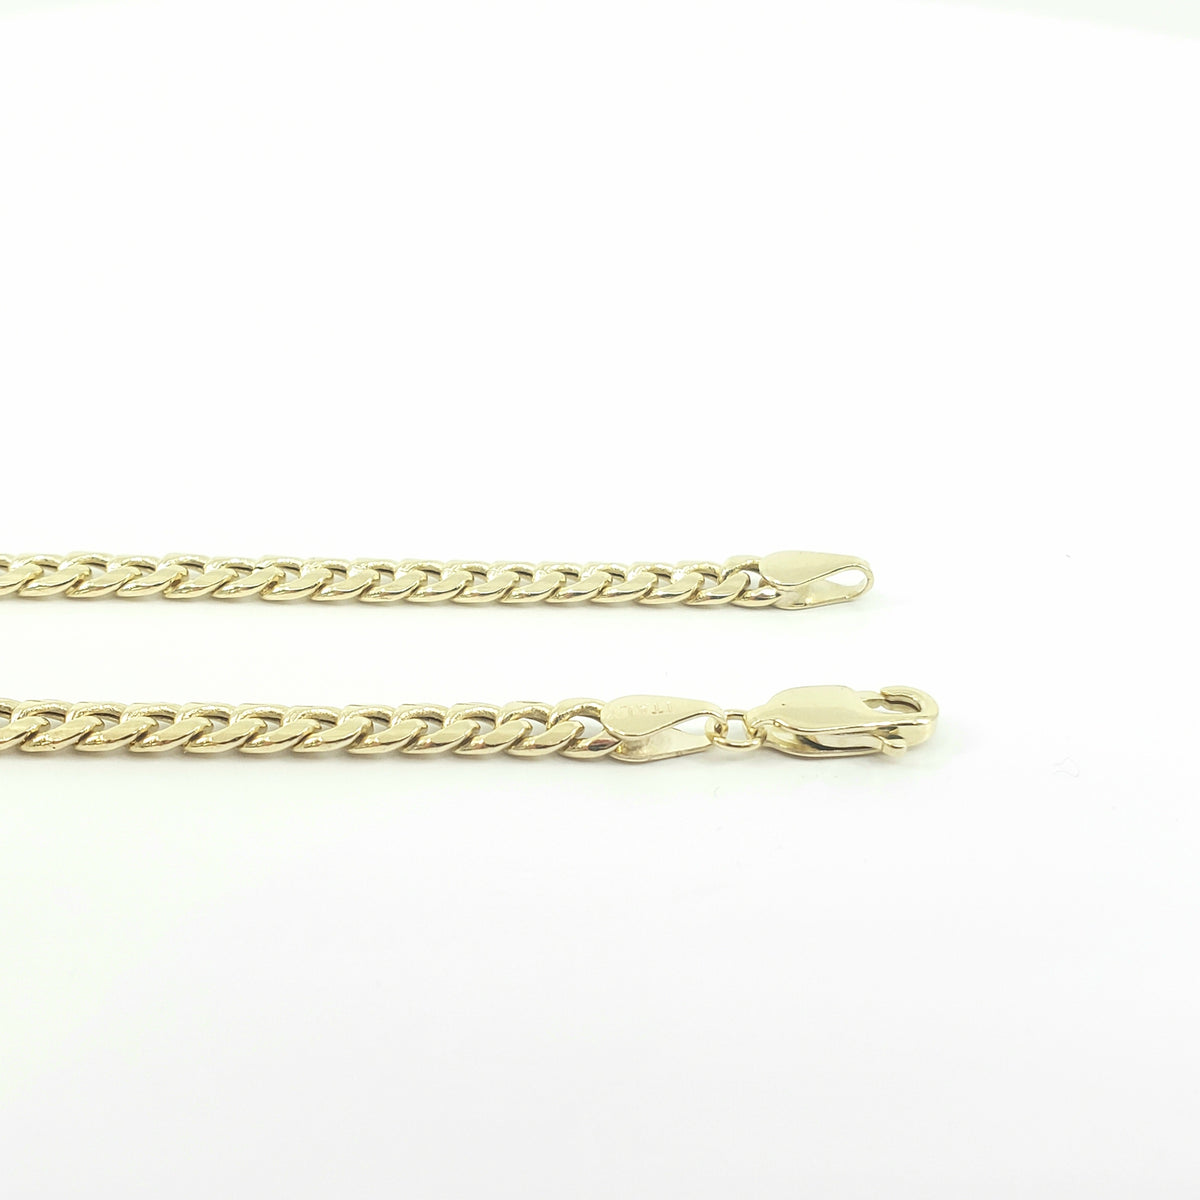 10K Yellow Gold 3.7mm Miami Curb Chain - 24 Inches